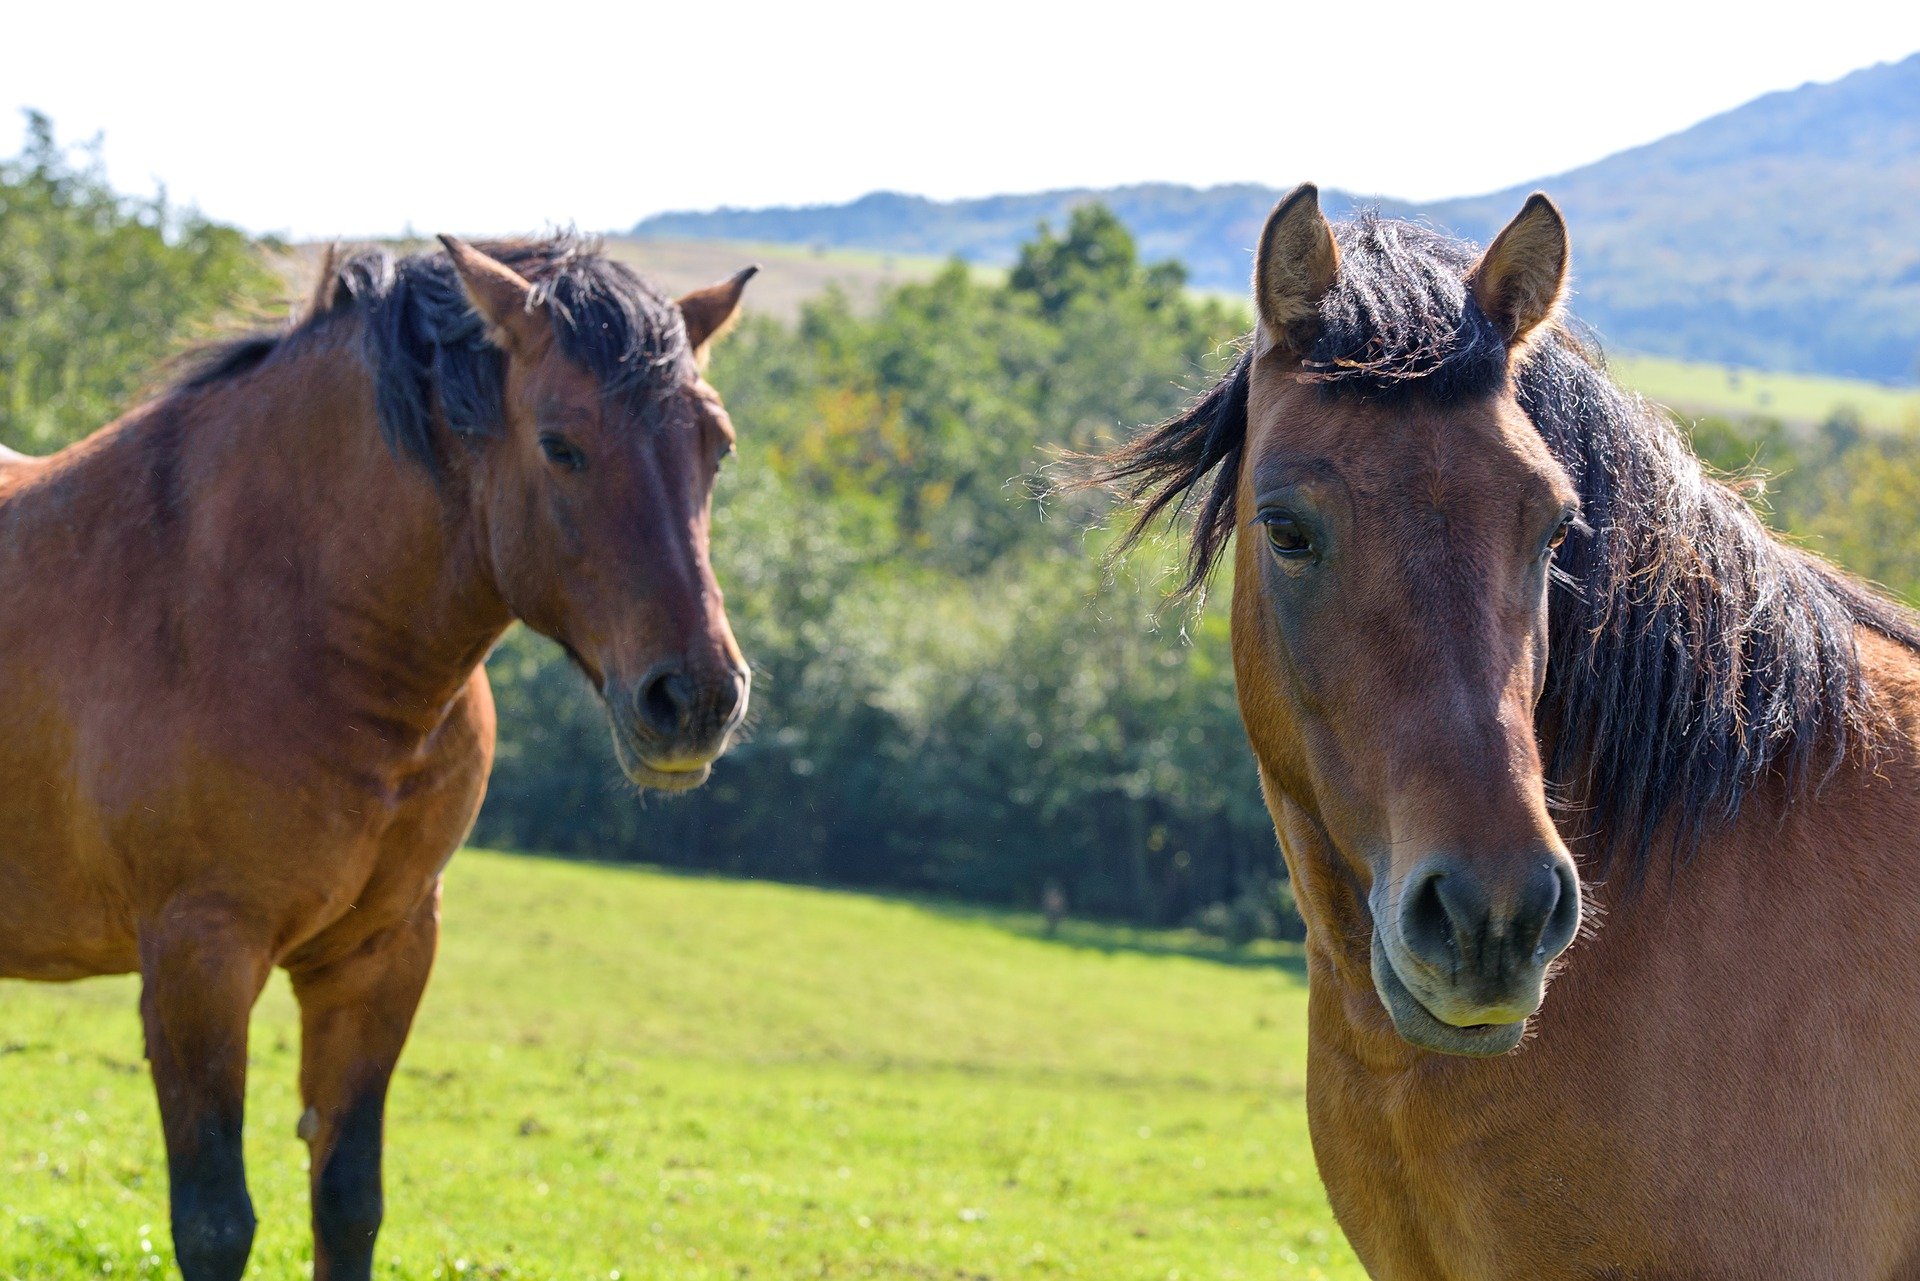 Pictured - A pair of brown horses on the pasture land | Source: Pixabay 